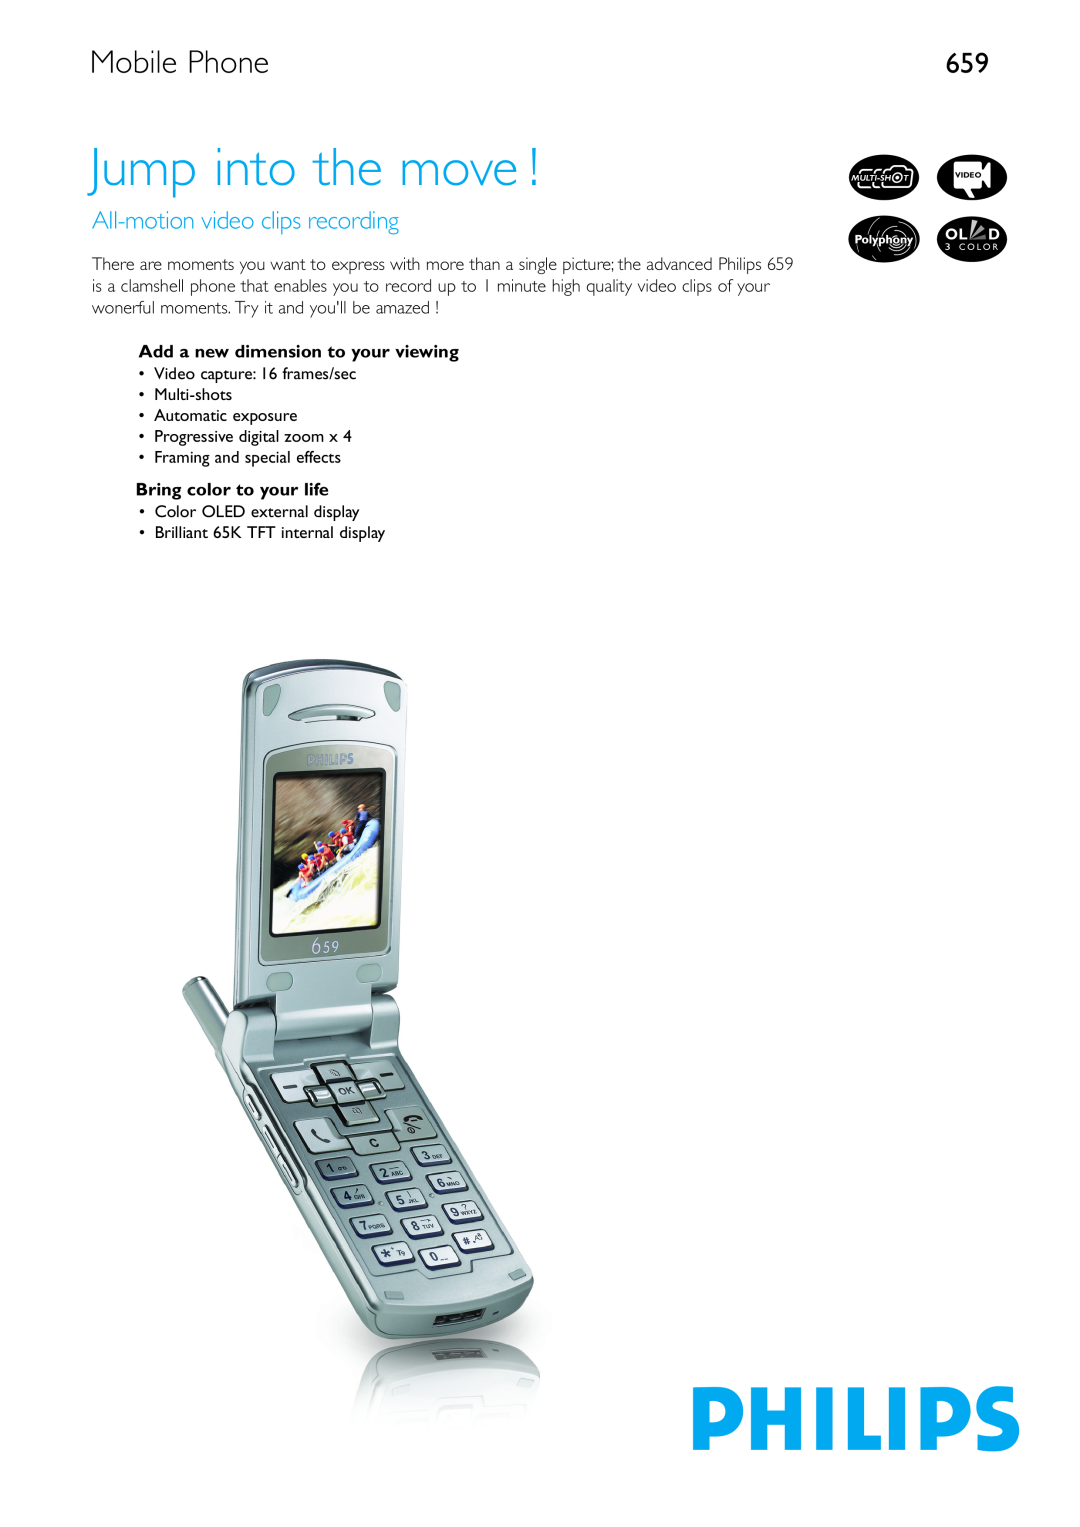 Philips 659 manual Mobile Phone, Add a new dimension to your viewing, Bring color to your life, Jump into the move 